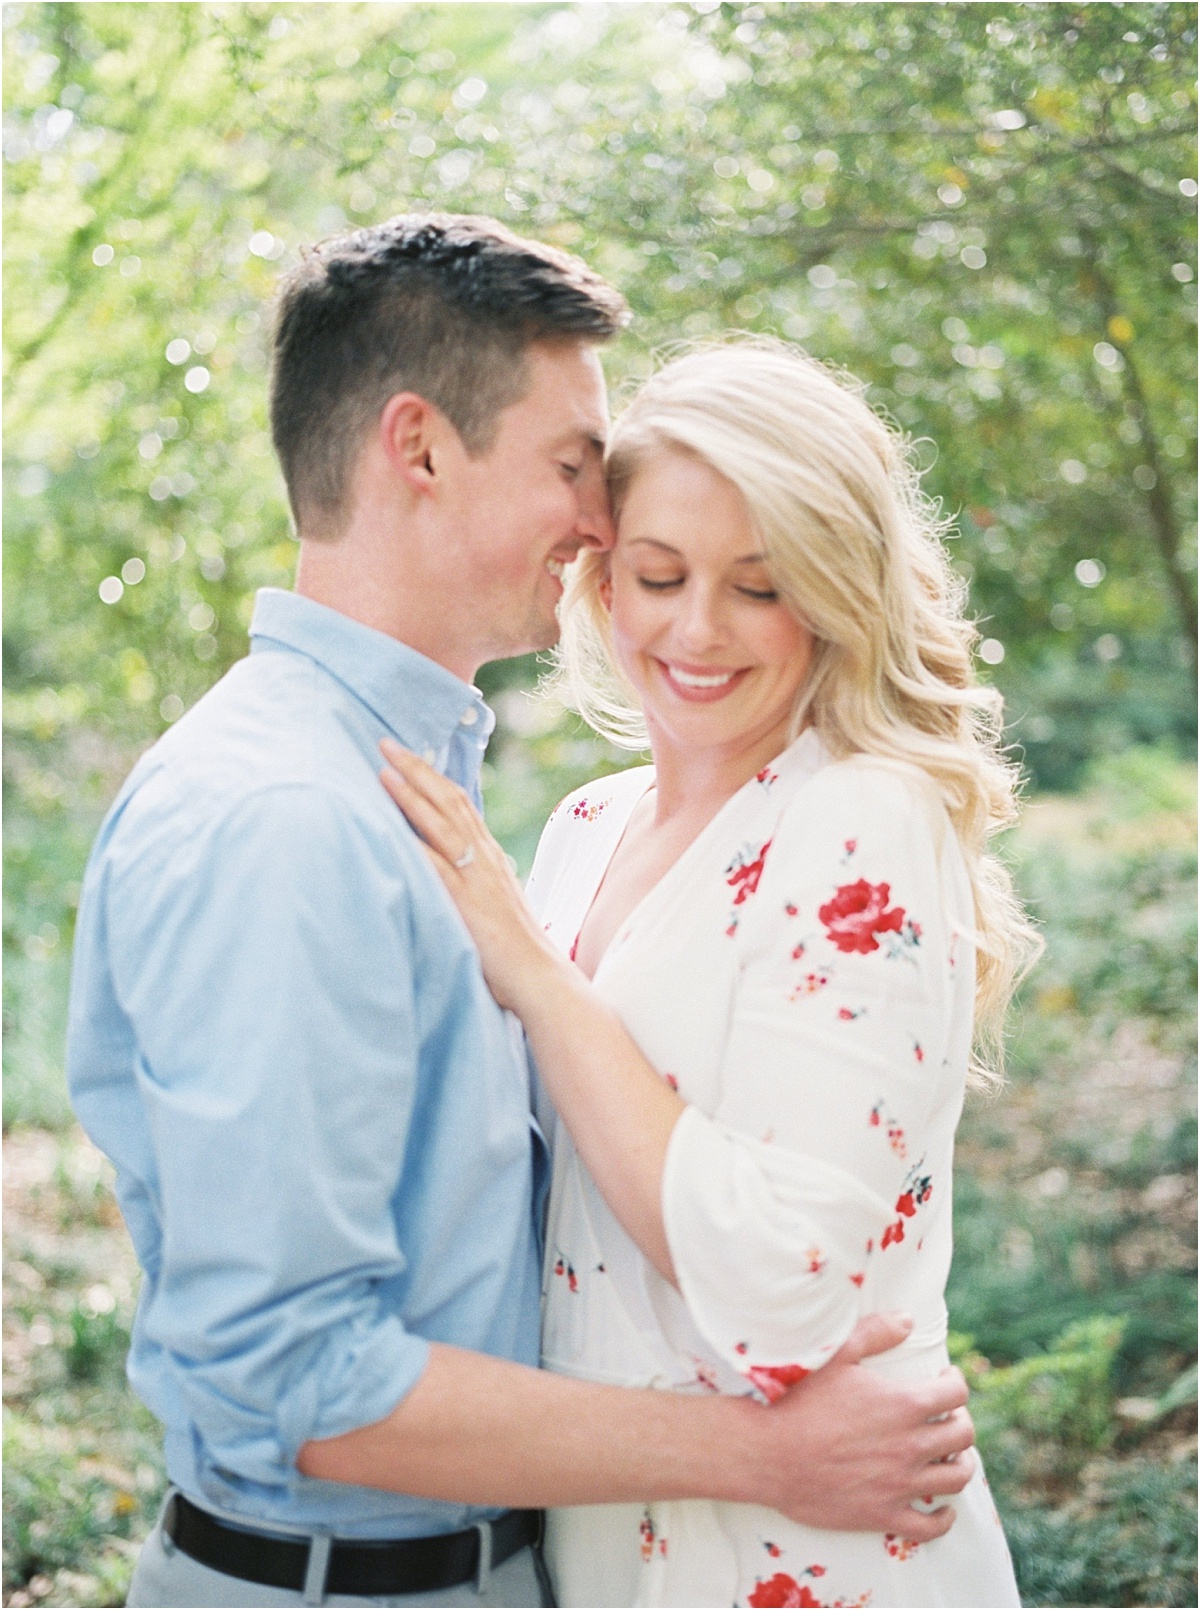 Ashley and Jamin || Wedding Photographer || Botanical Gardens, Downtown Engagement and Front Porch Session || Birmingham, AL